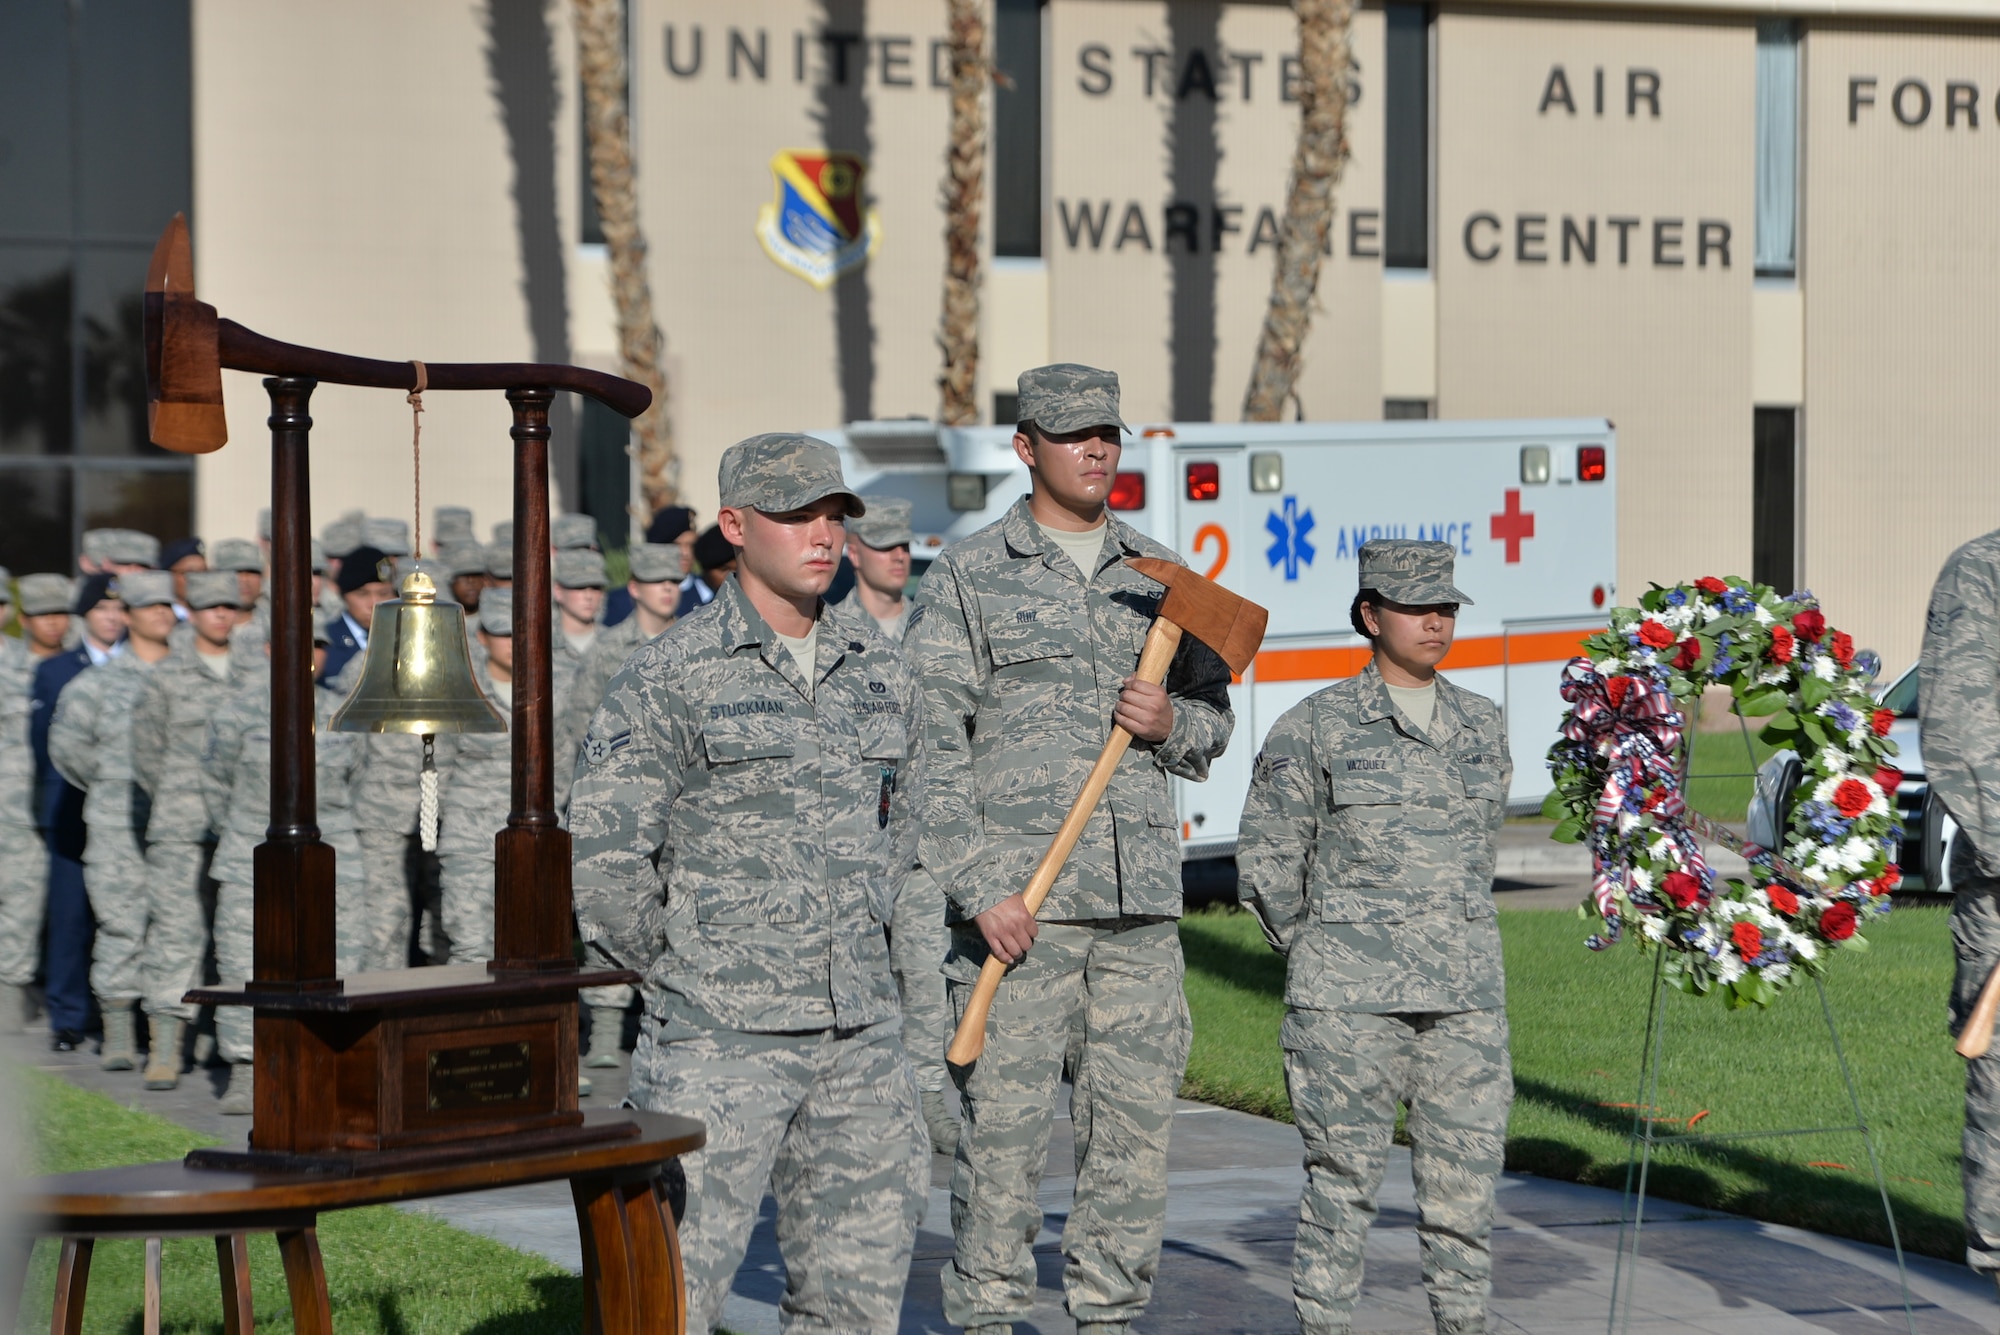 9/11 remembrance ceremony held at Nellis